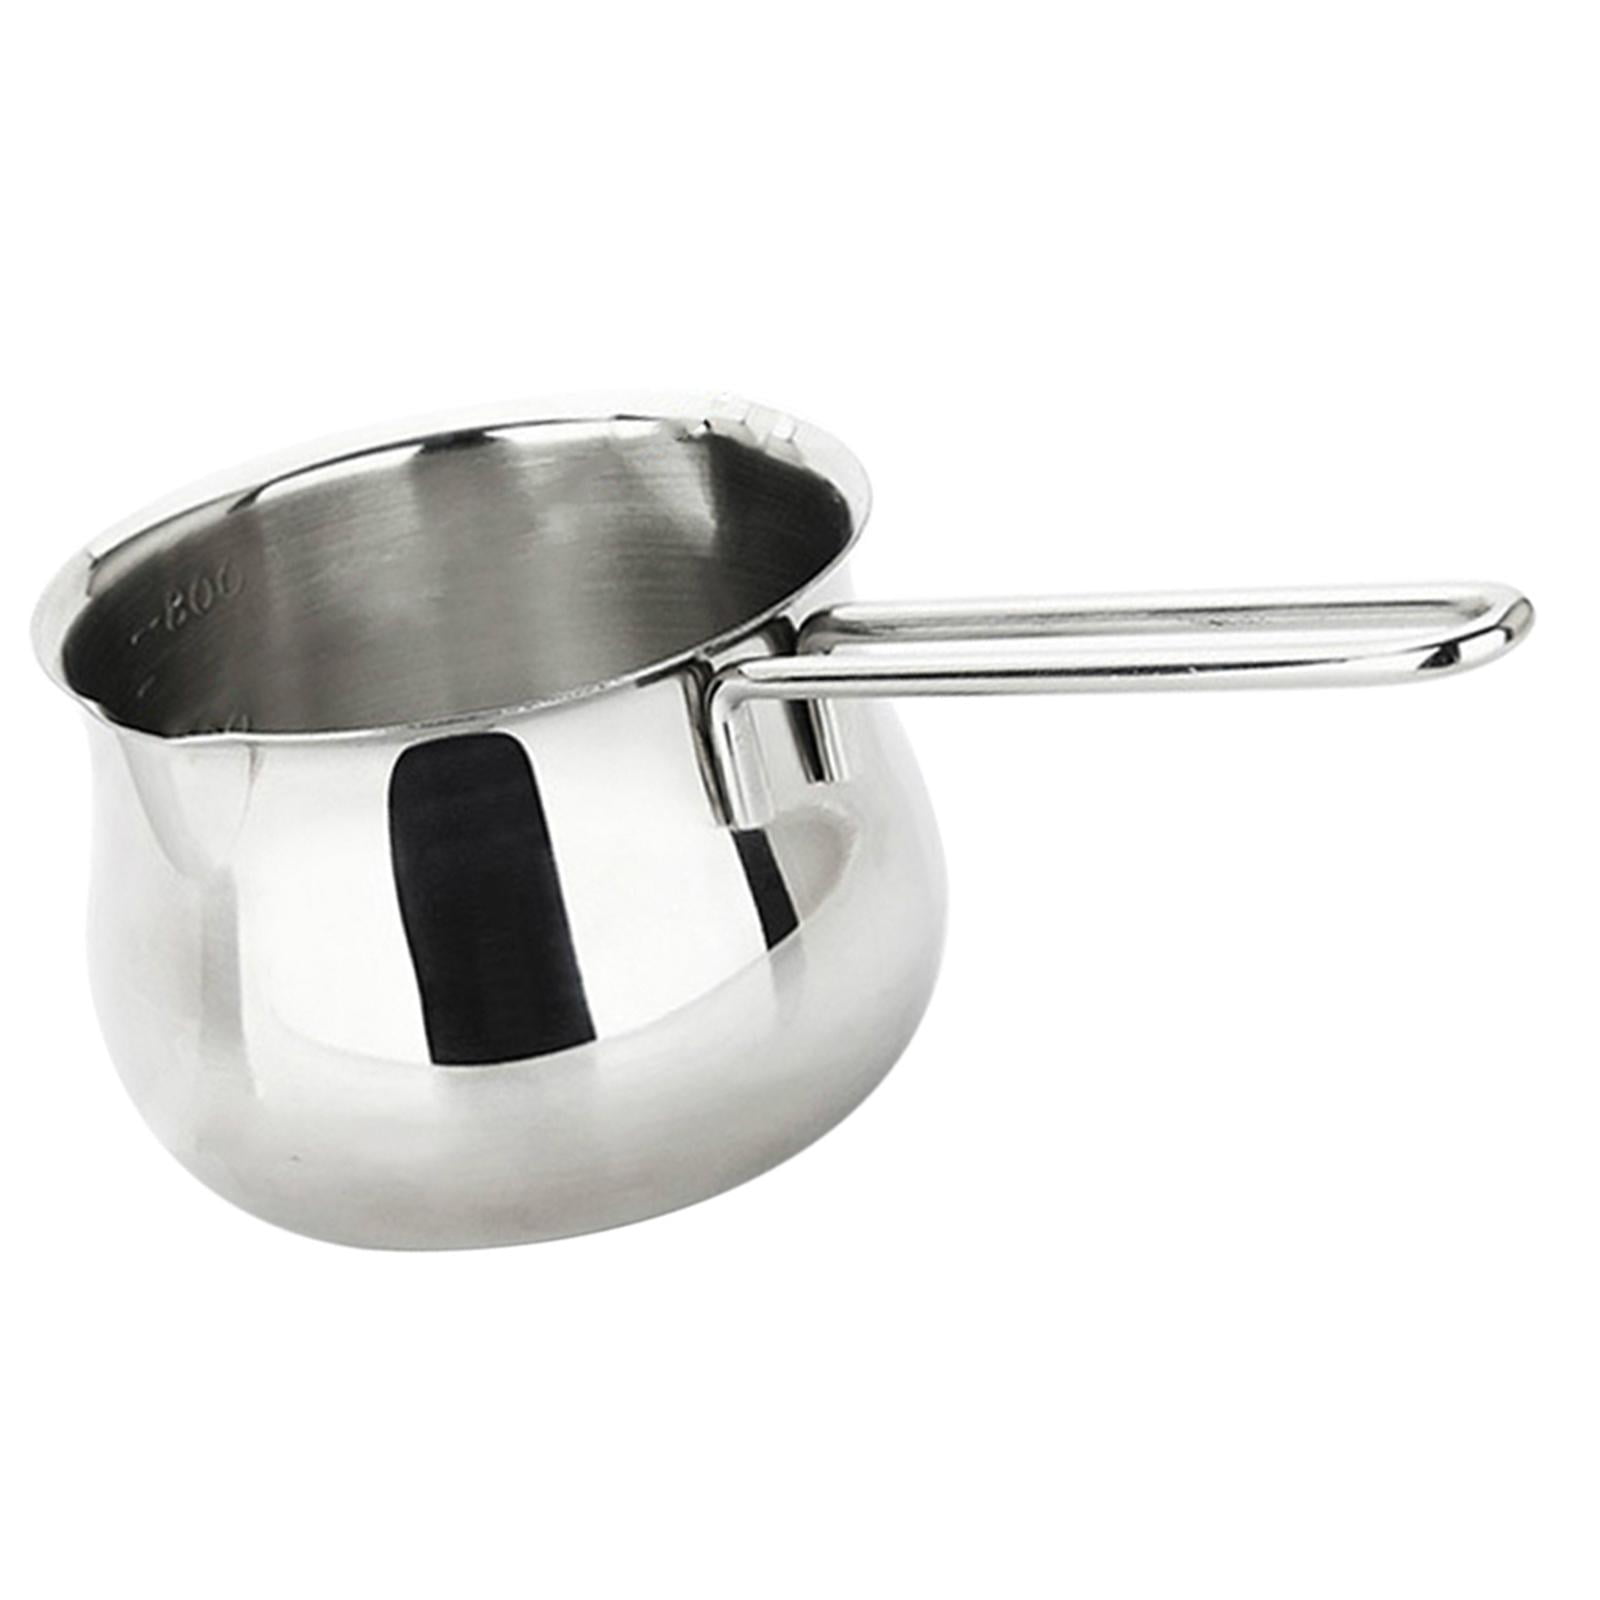 LuckyTag Premium Quality 304 Stainless Steel Small Saucepan With Easy  Pouring Spouts, Mini Oil Butter Melting/Warmer Pot, Milk Pan, Light Weight